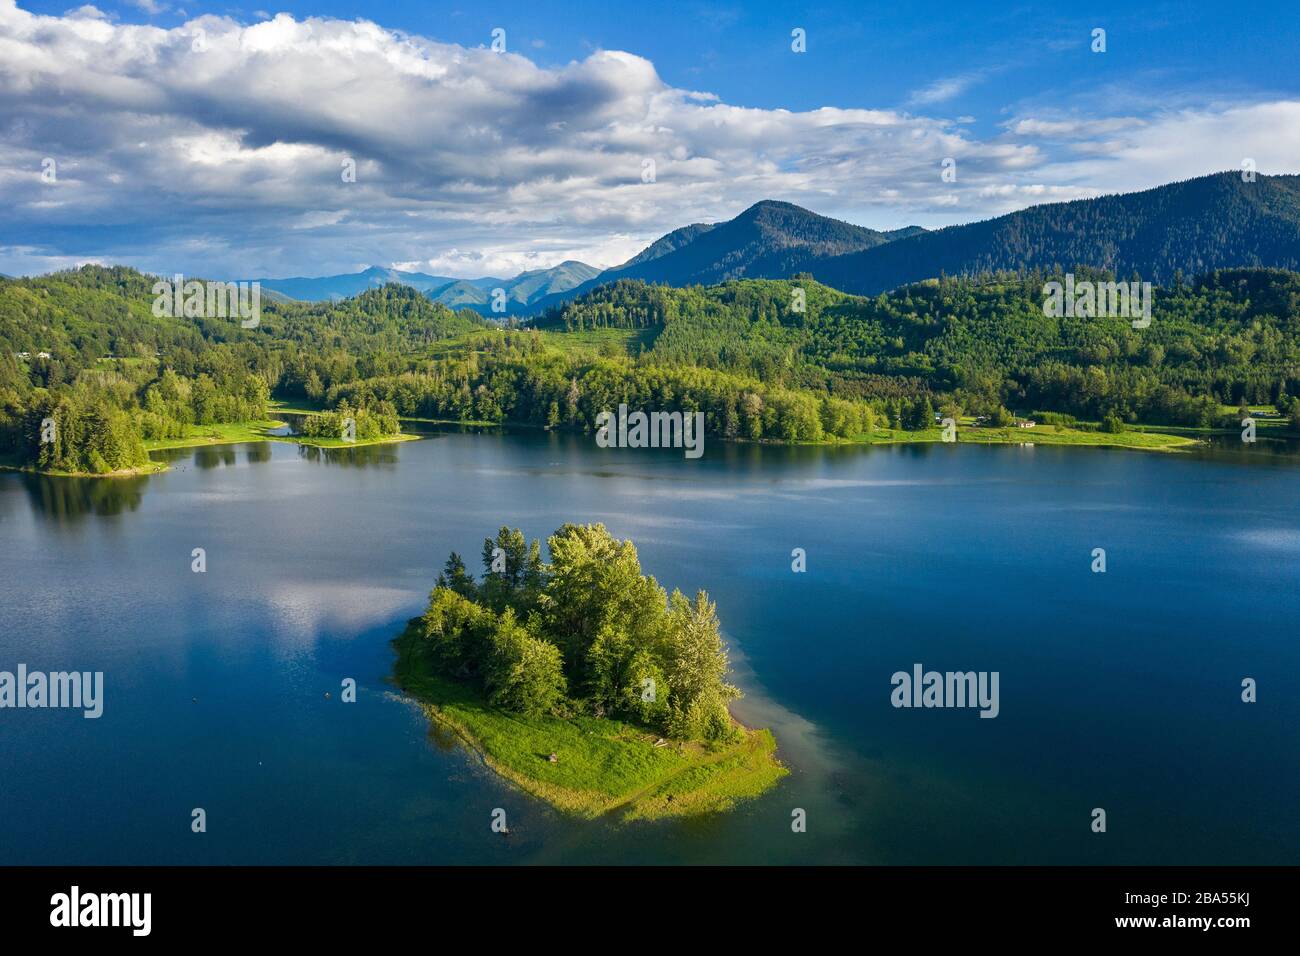 Alder Lake is formed by the Nisqually river in Rainier Stock Photo